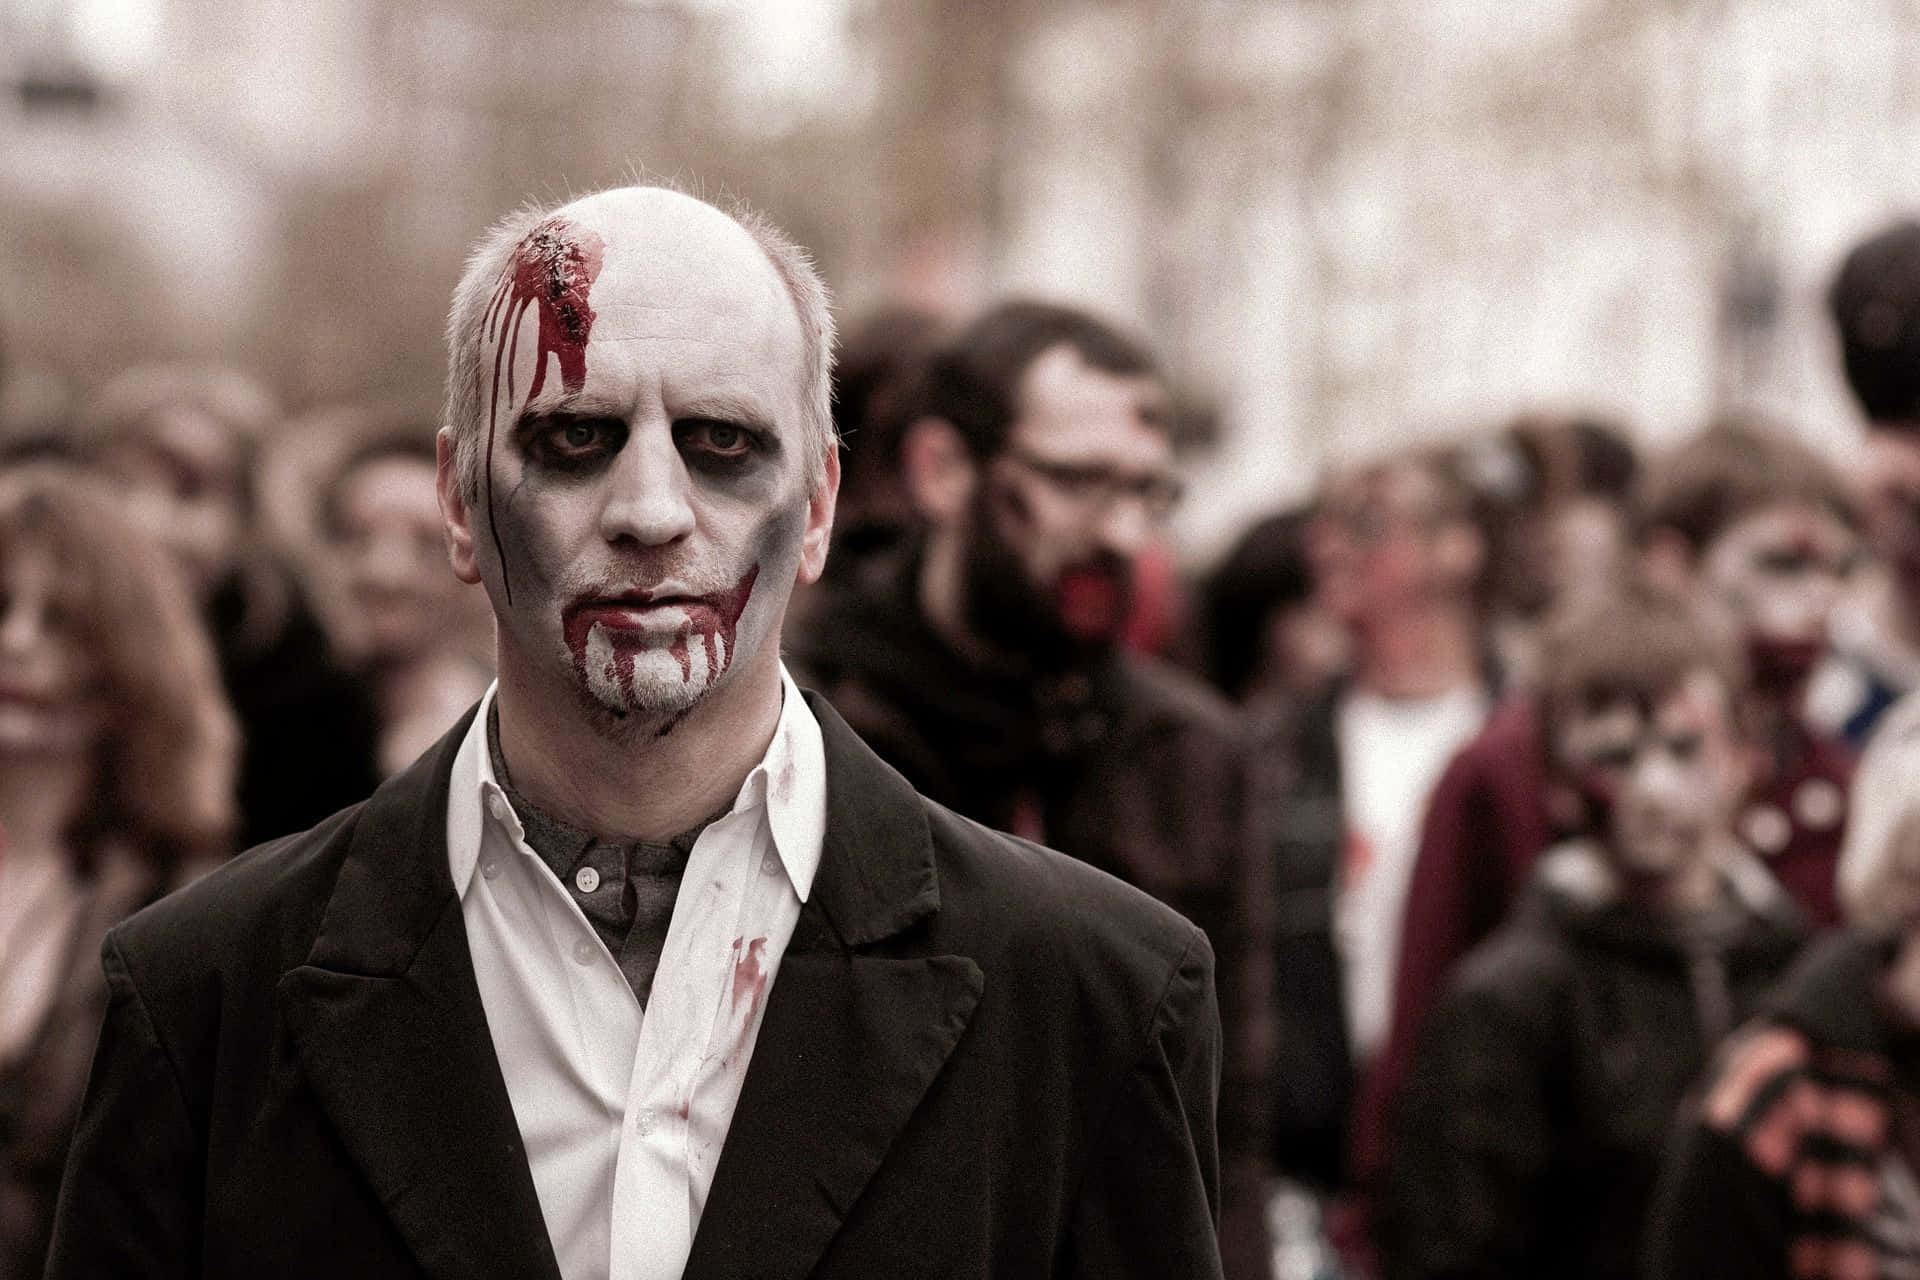 A Man Dressed Up As A Zombie In A Crowd